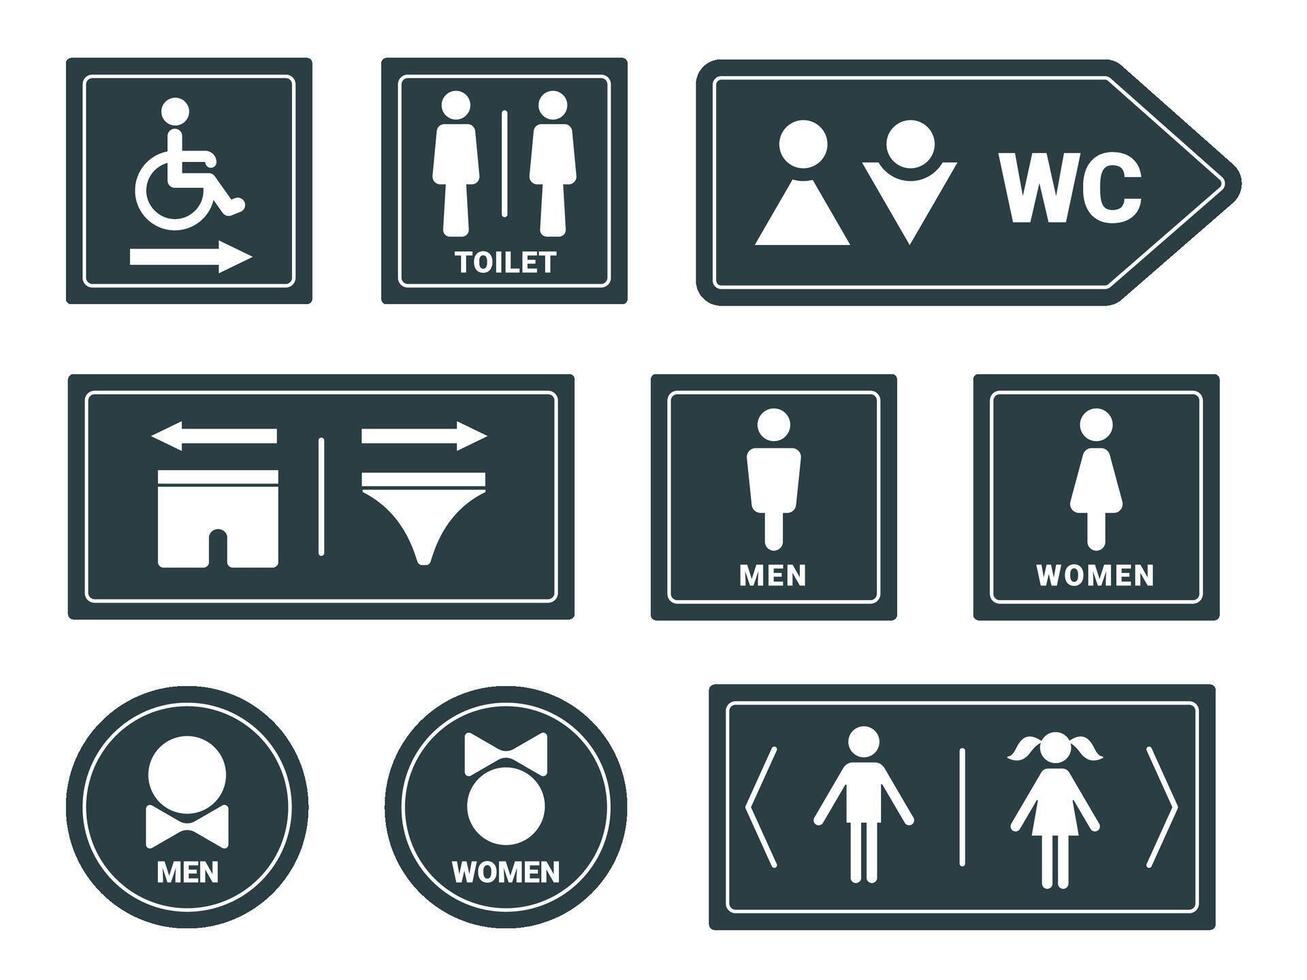 Man and woman wc, bathroom or restroom sign with arrows. Disabled person wc icon. Toilet design with underpants, gender pictogram vector set